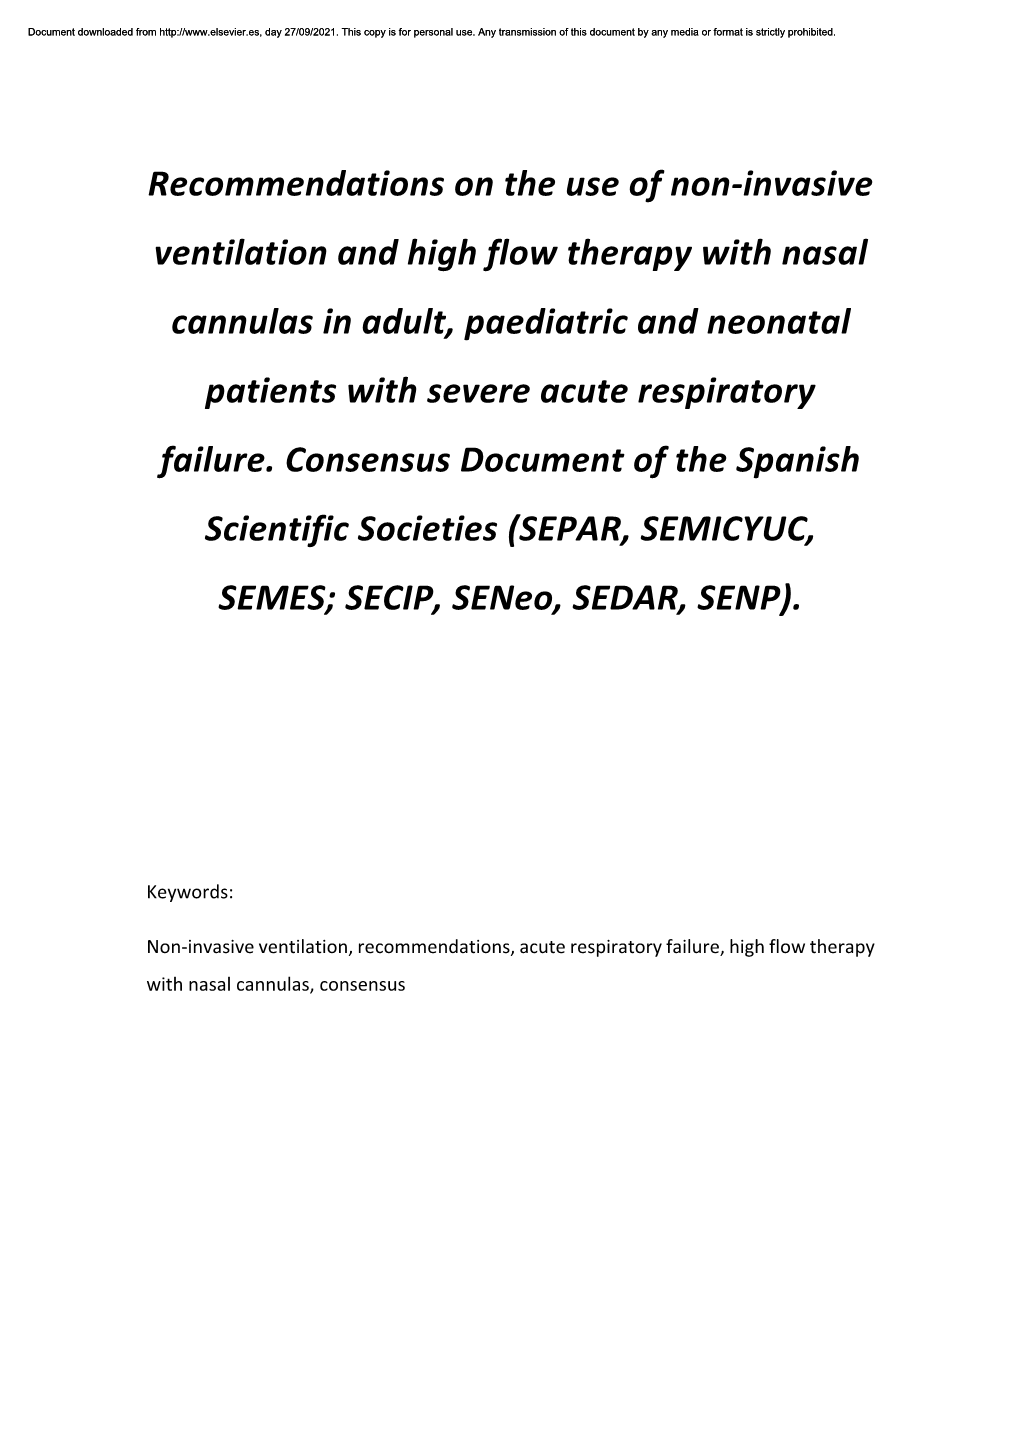 Recommendations on the Use of Non-Invasive Ventilation and High